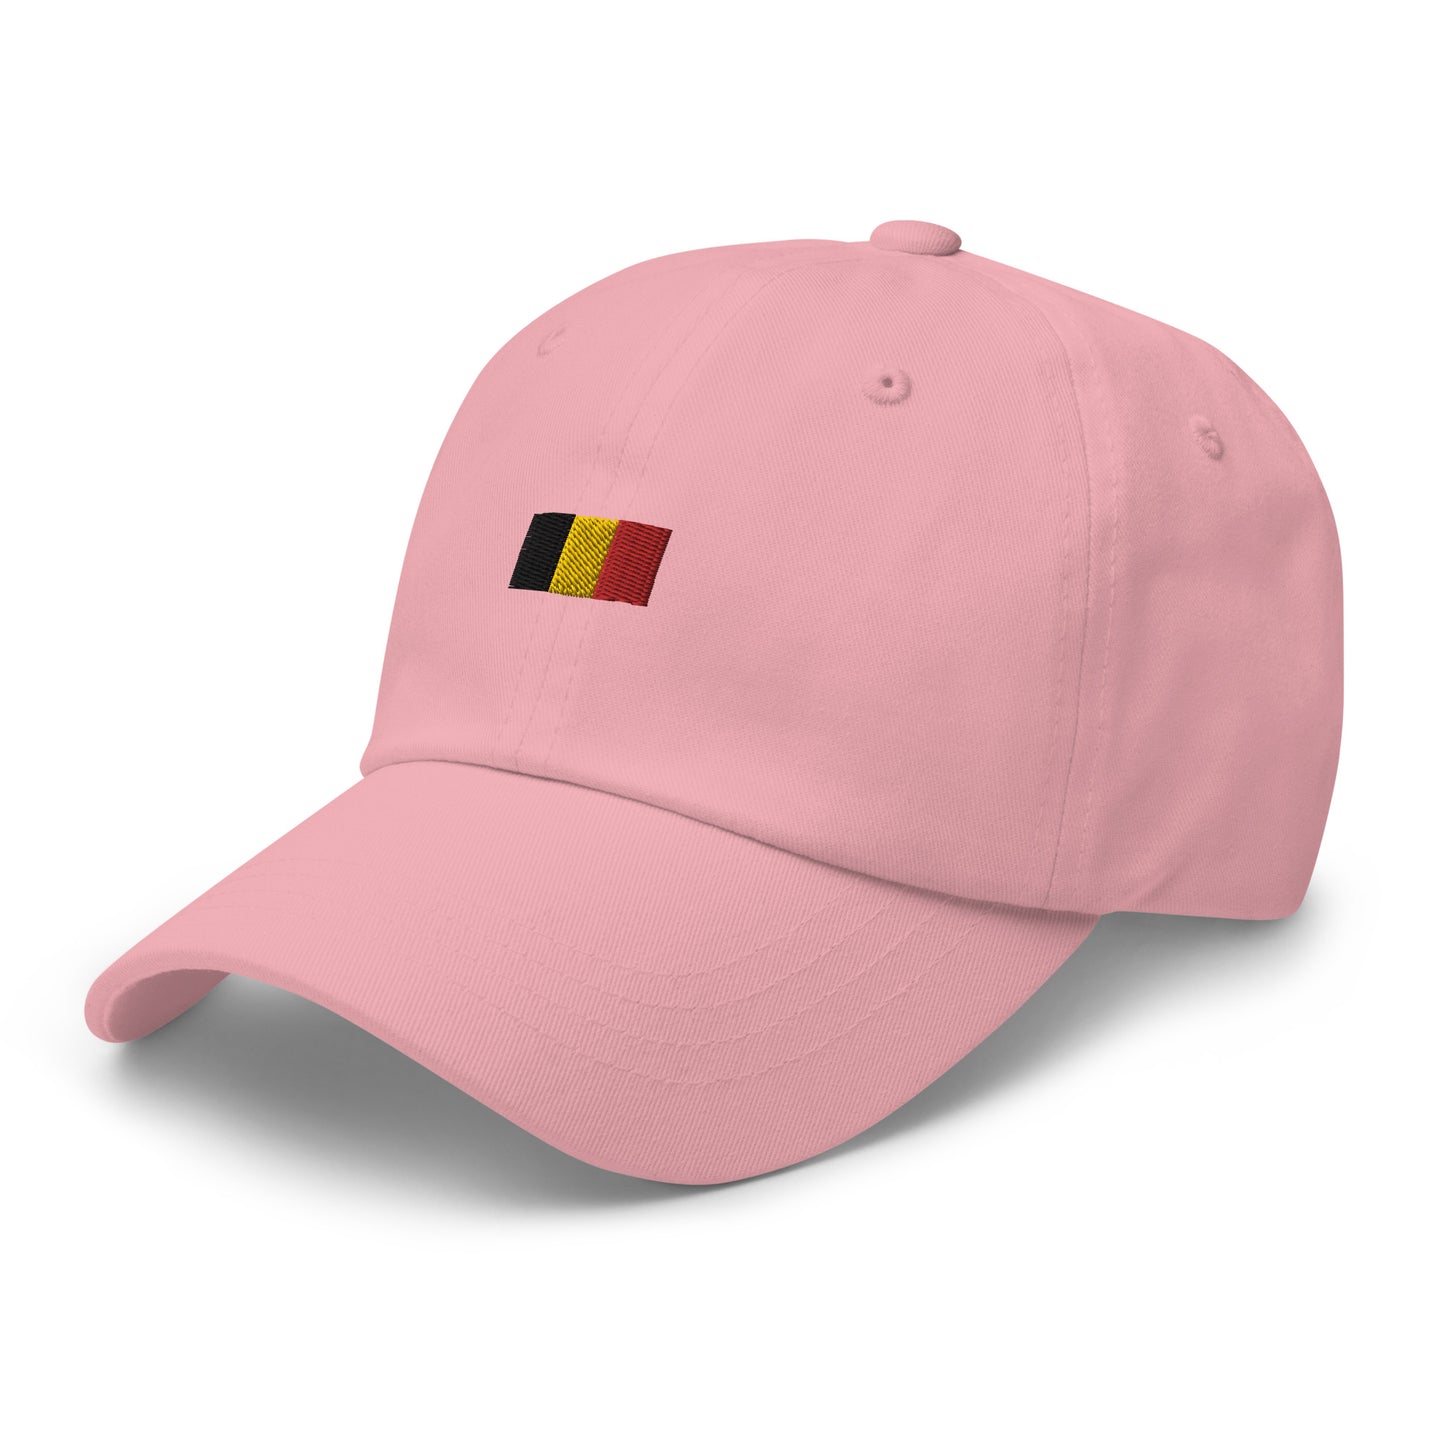 cap-from-the-front-with-belgian-flag